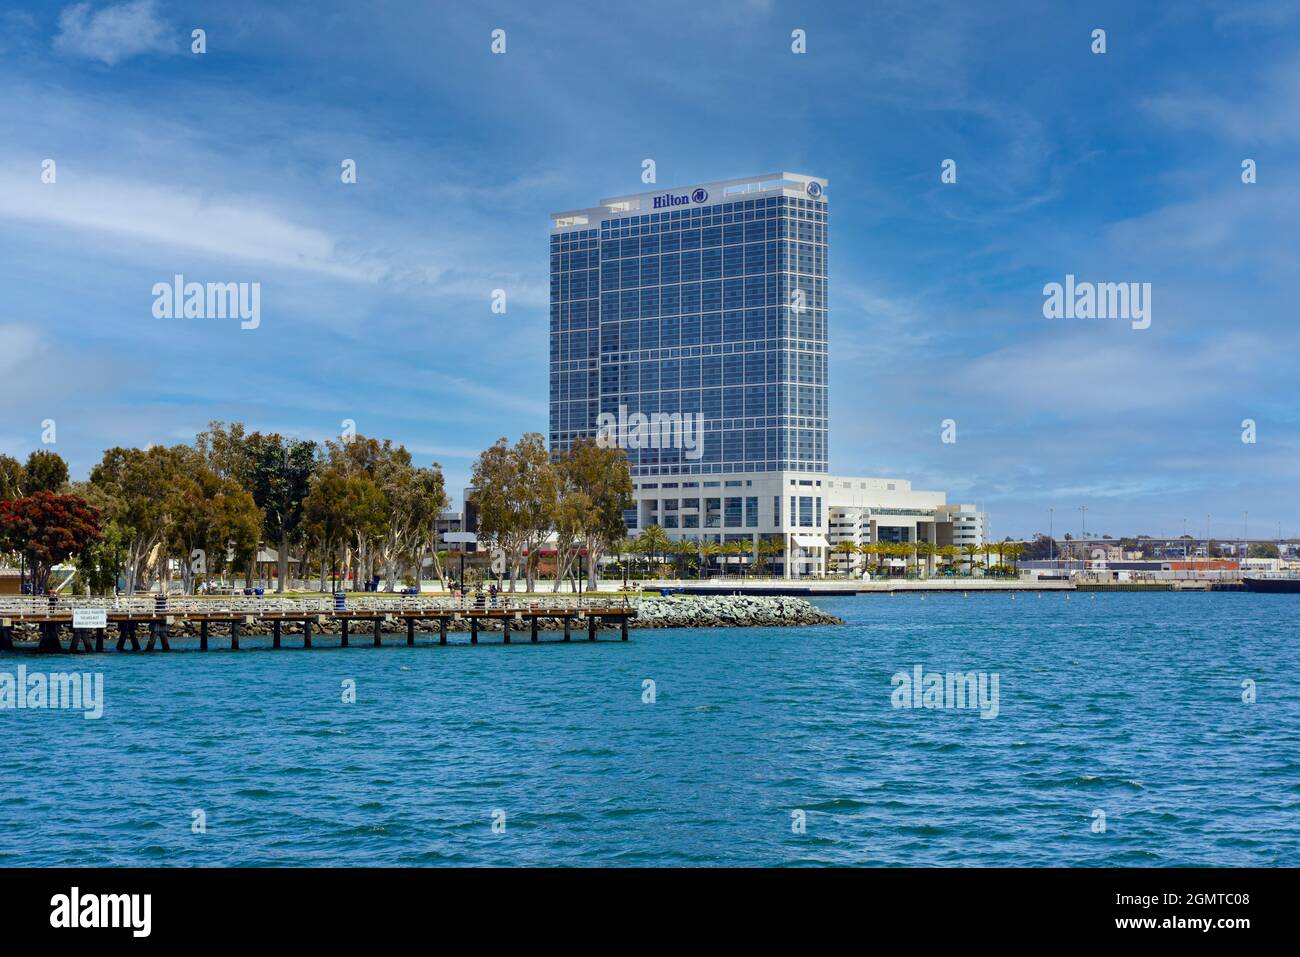 A view across the San Diego Bay of the South Embarcadero Park and the Hilton San Diego Bayfront Hotel across from the Coronado Bridge in San Diego, CA Stock Photo